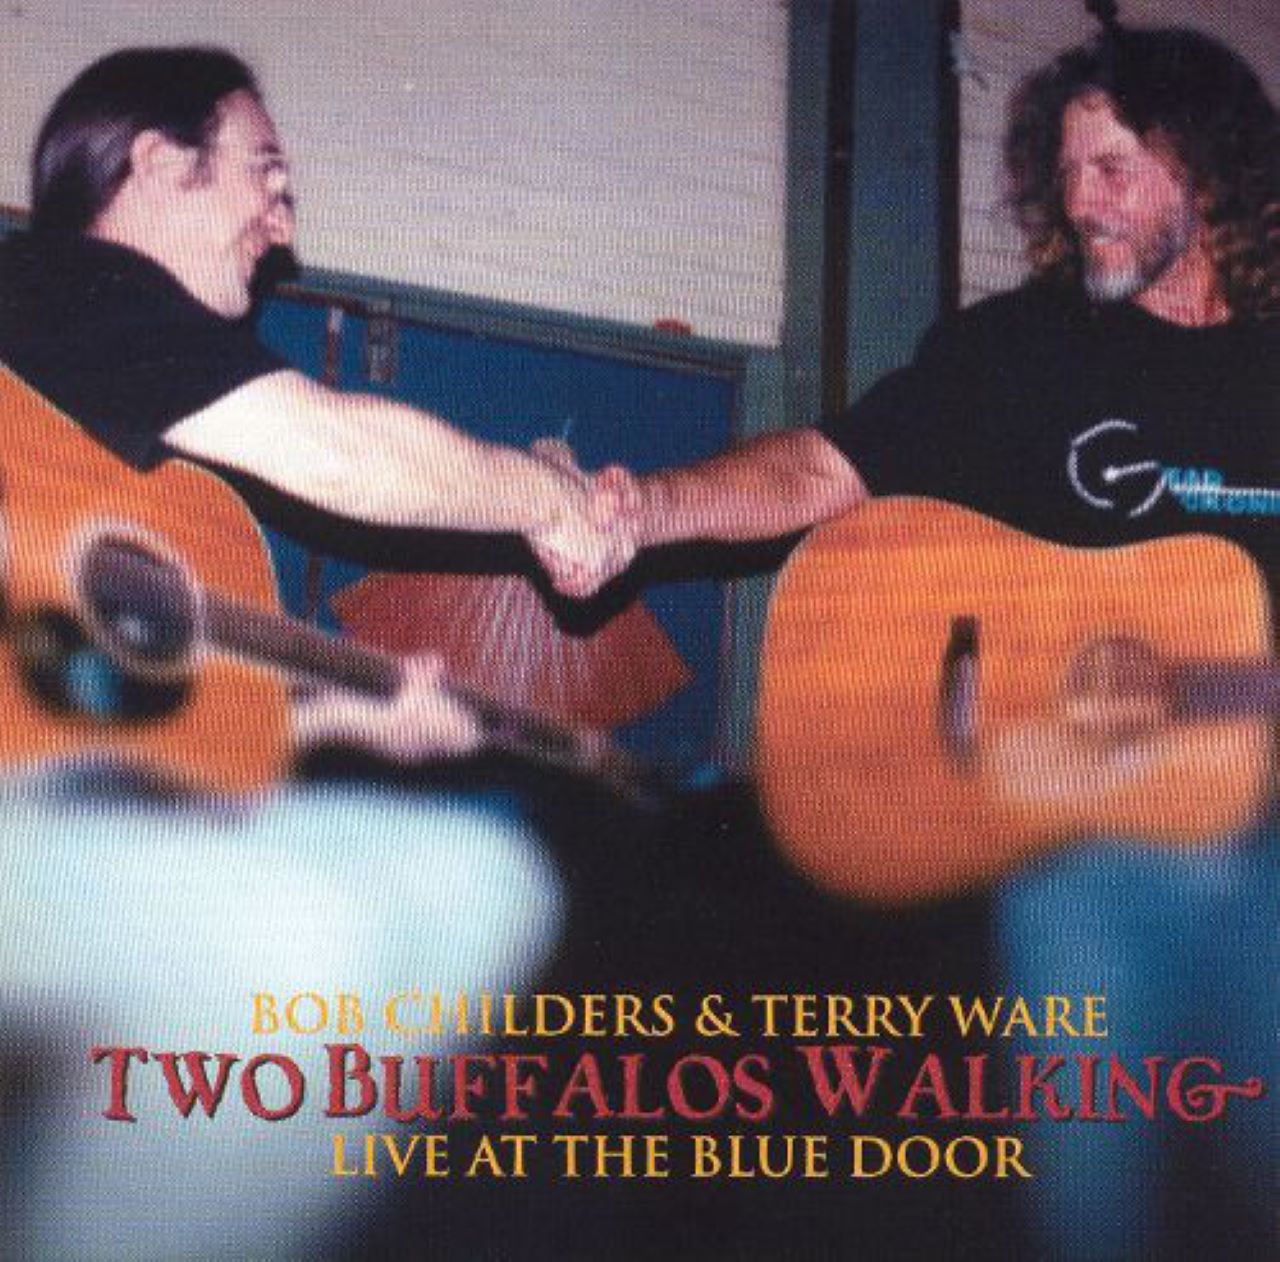 Bob Childers & Terry Ware - Two Buffalos Walking - Live At The Blue Door cover album